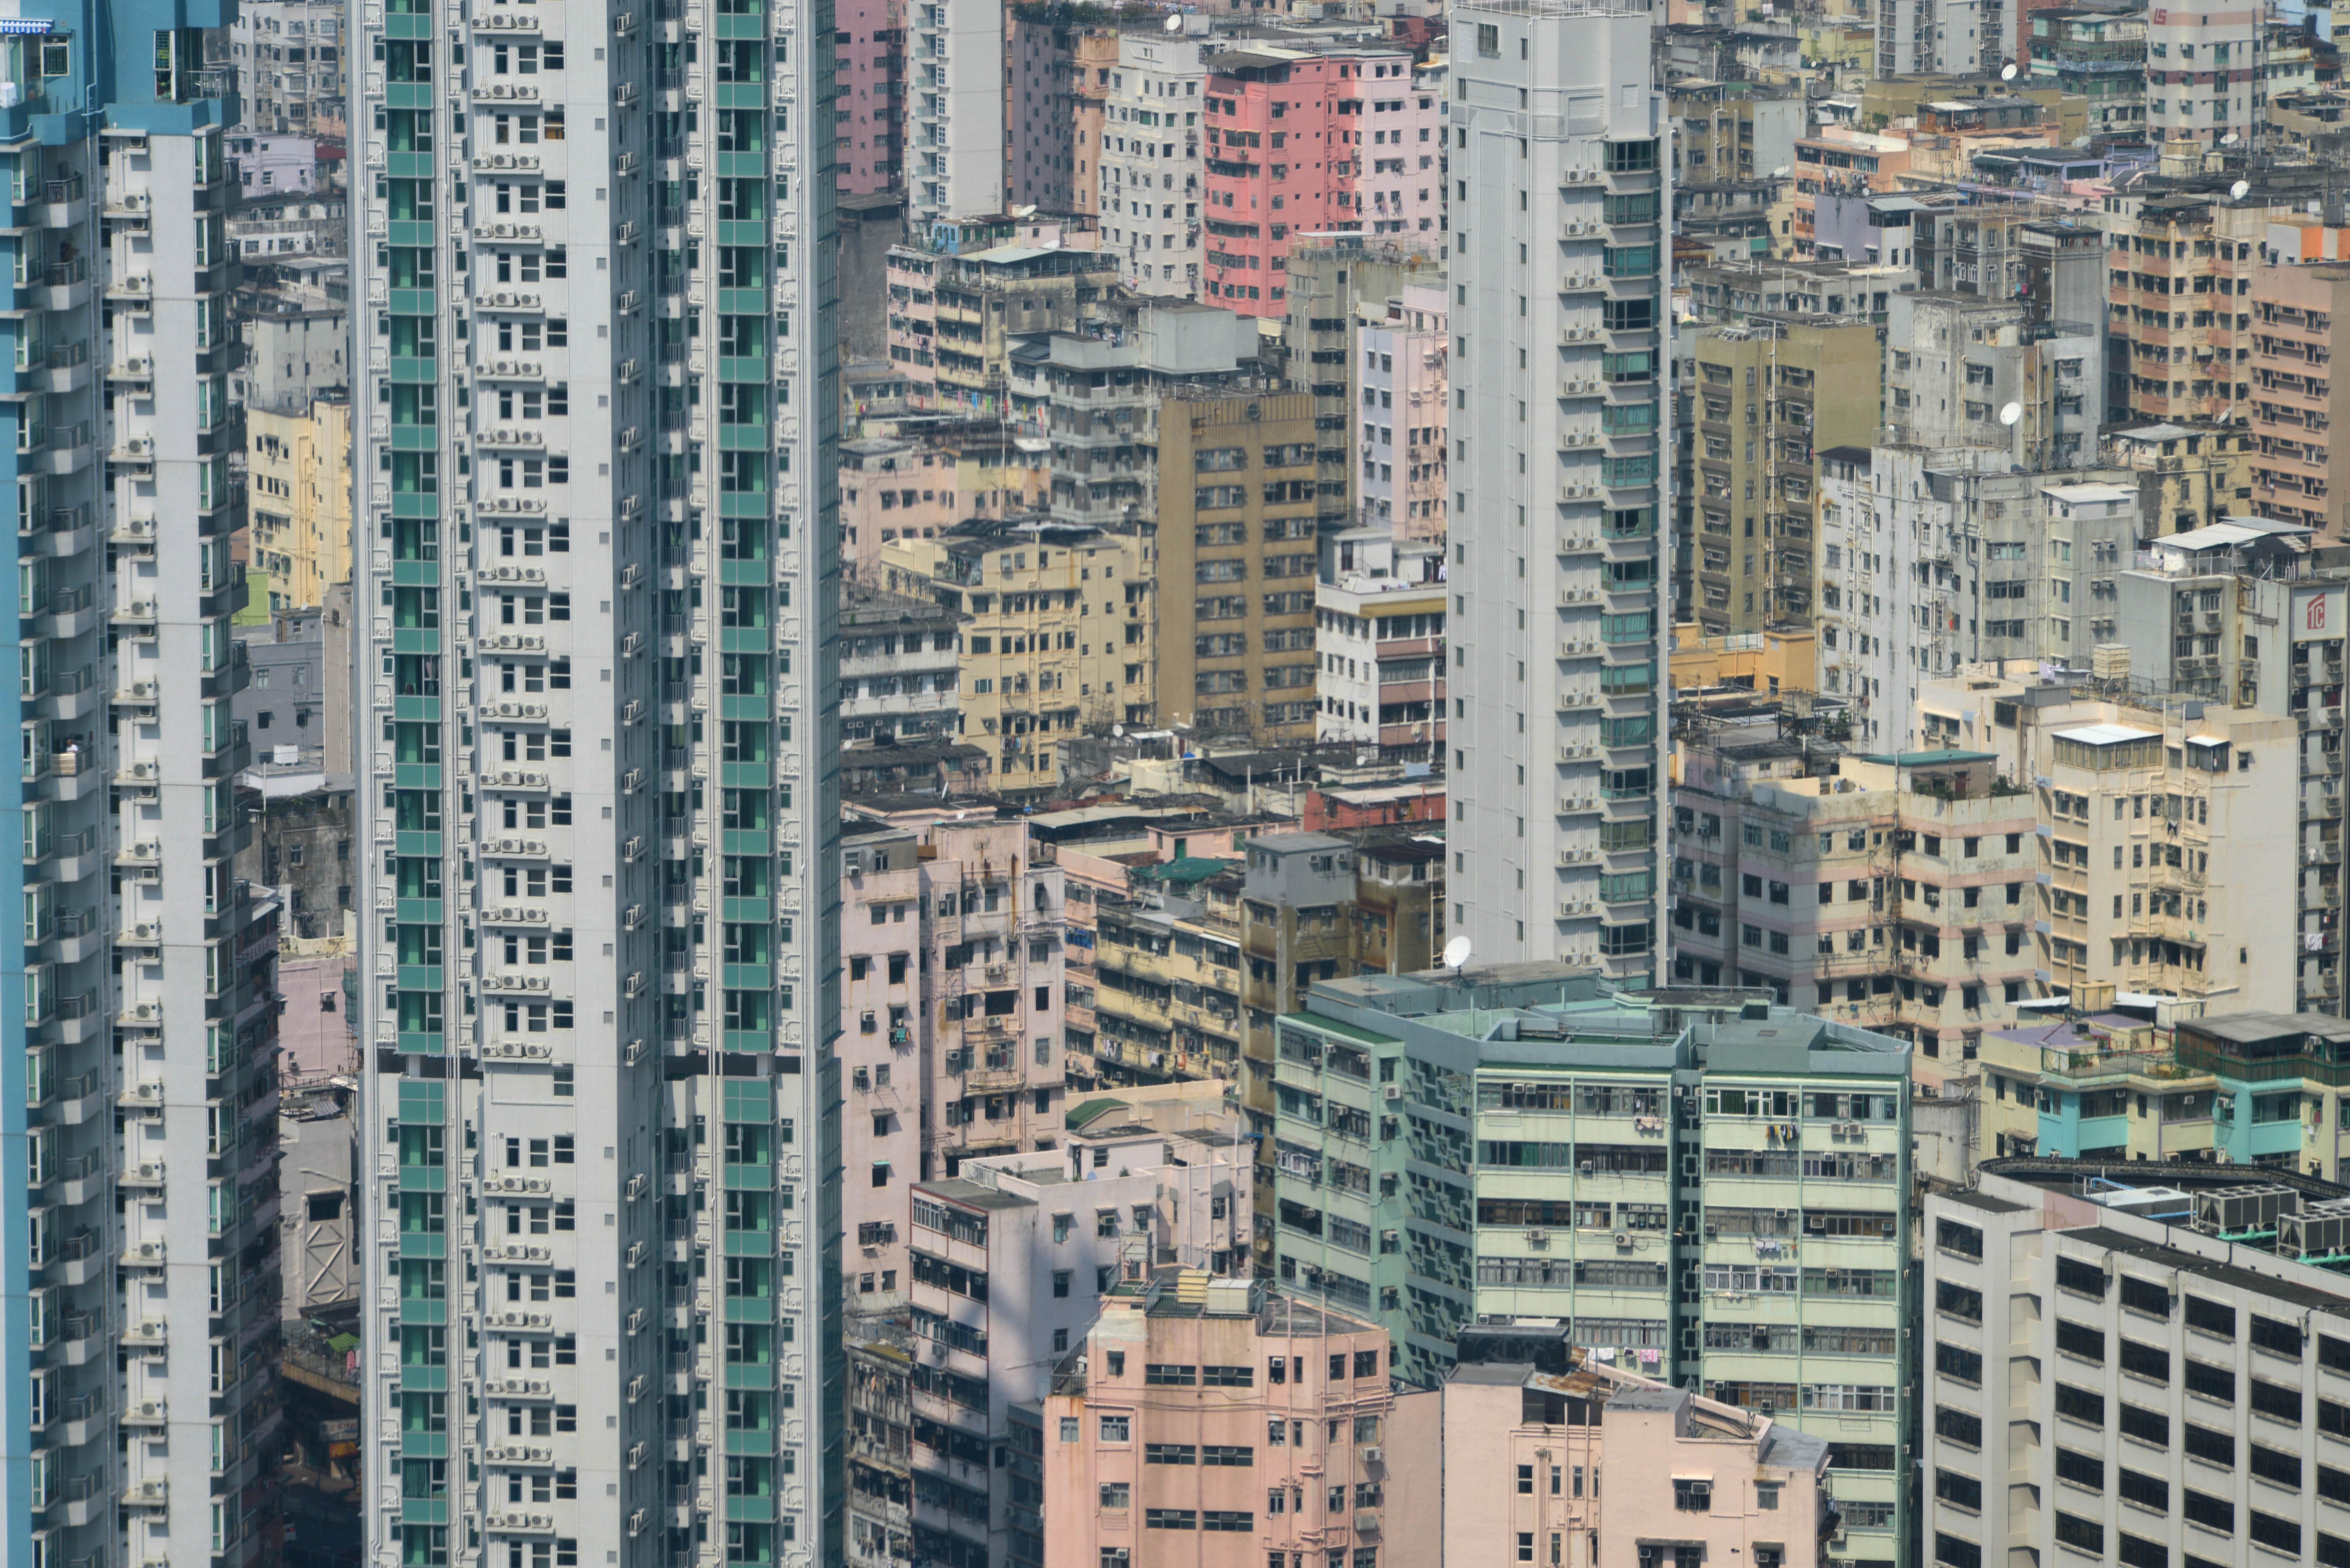 High prices in the world’s most expensive property market have left many in Hong Kong with only being able to afford tiny living spaces and to resort to self-storage facilities to resolve their storage needs. Photo: Antony Dickson